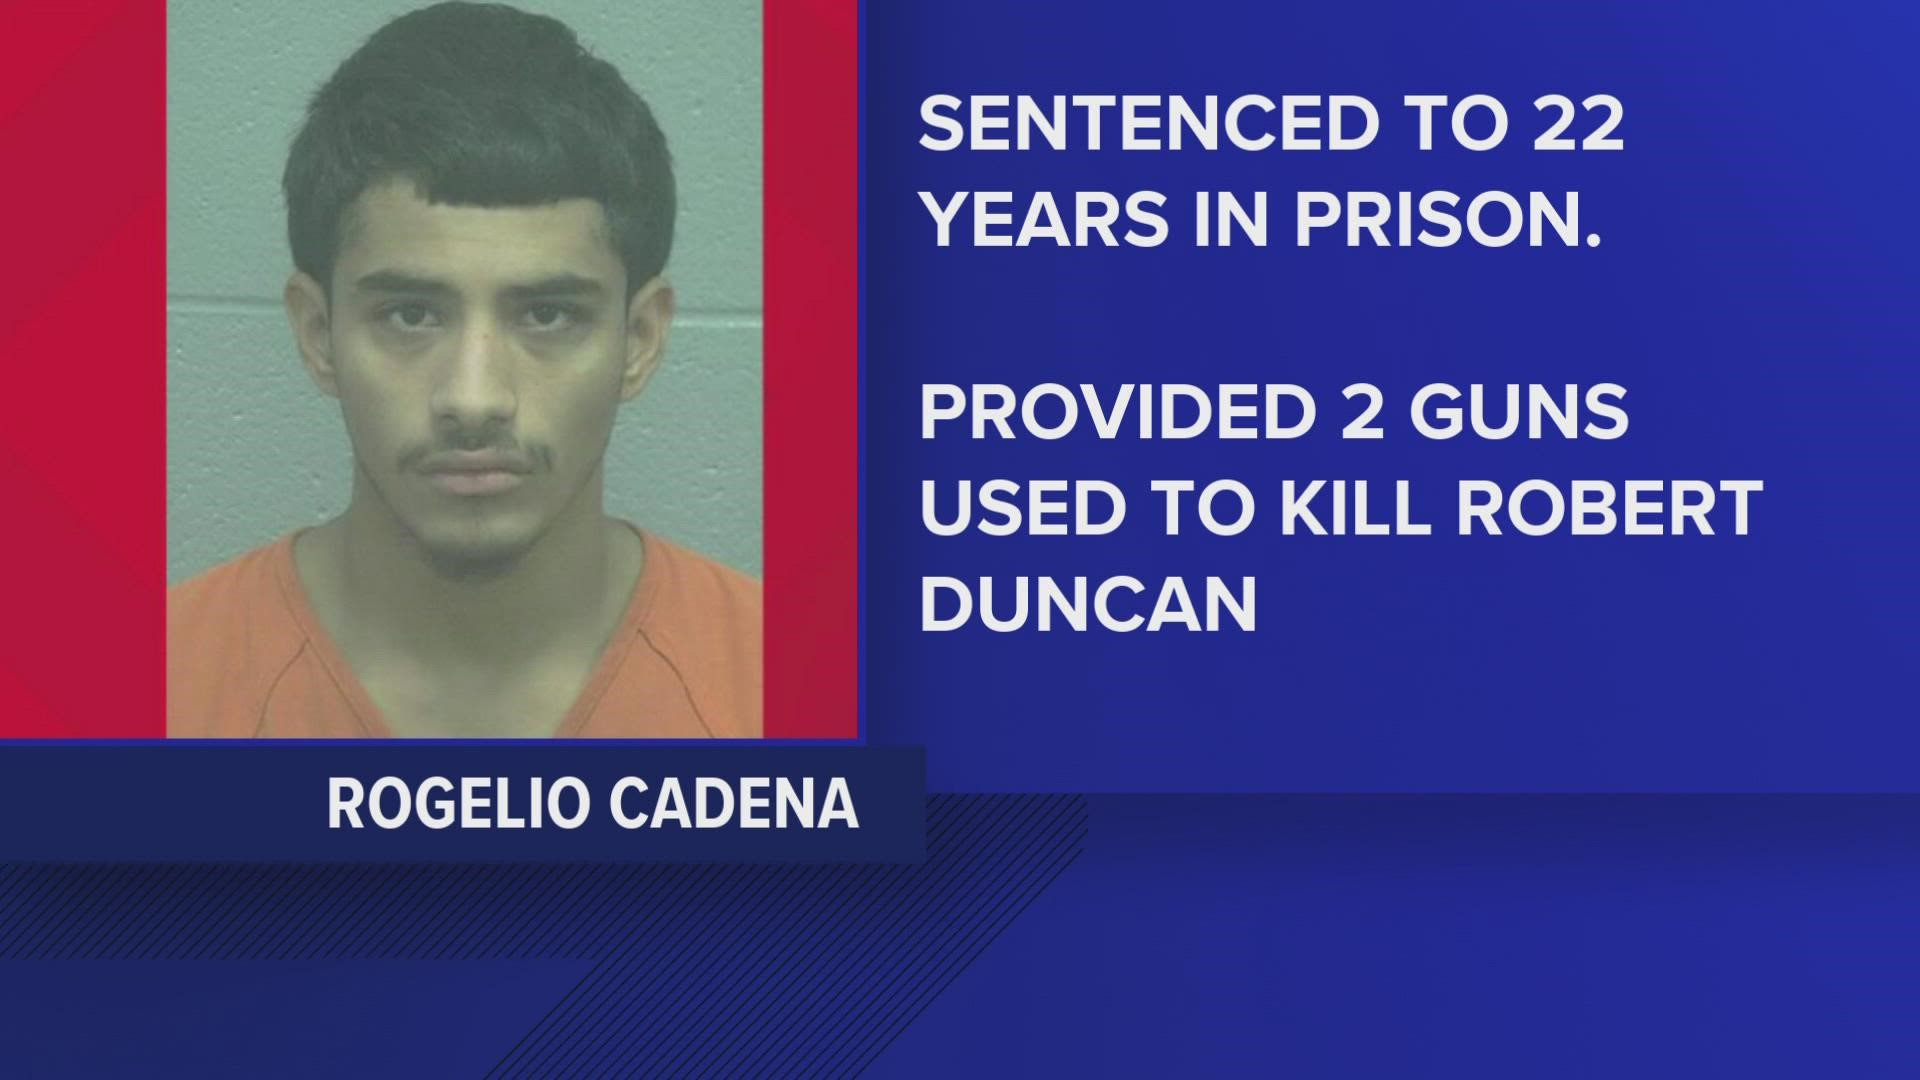 Evidence showed Rogelio Cadena provided the guns used by two other suspects in a robbery attempt that resulted in Duncan’s death.